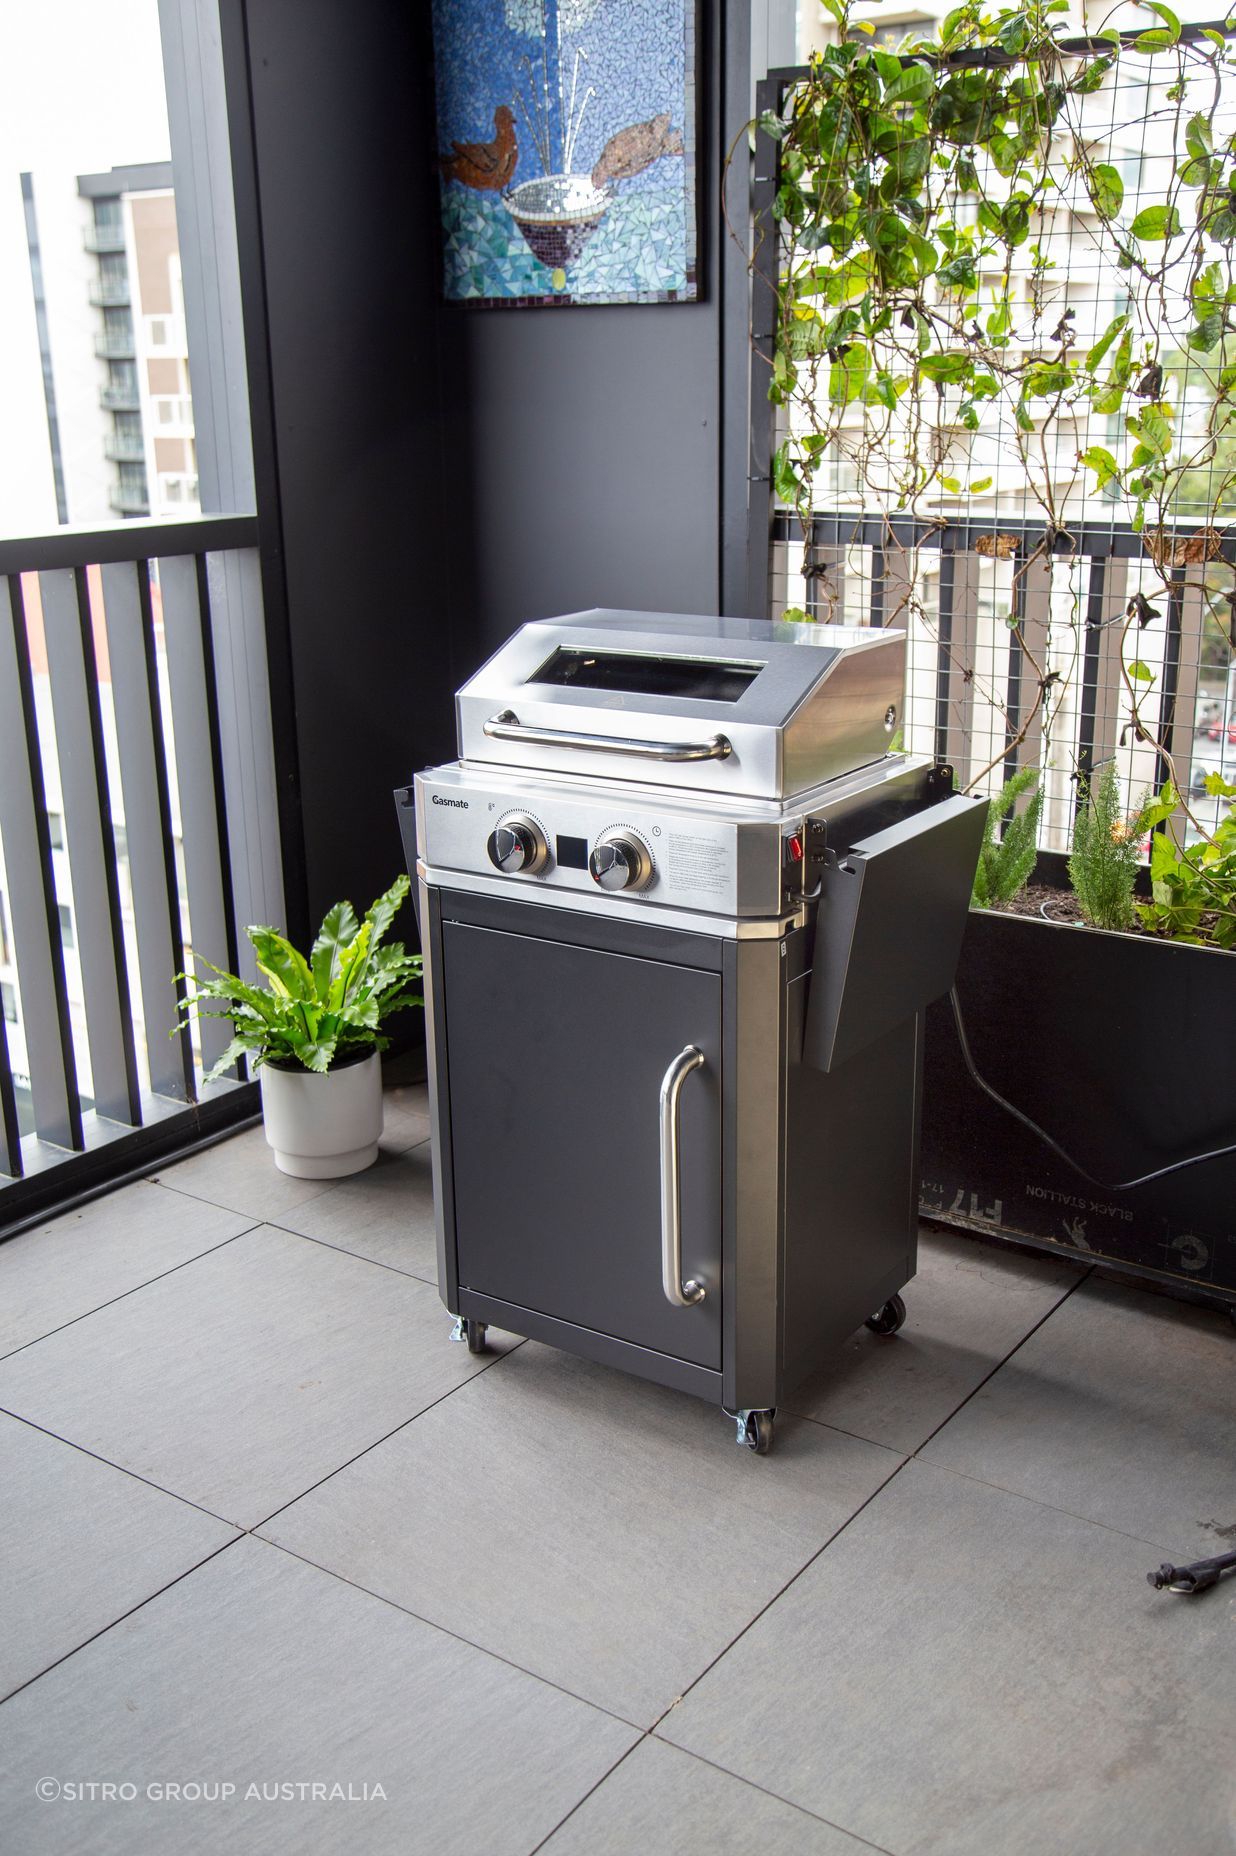 Perfect for apartment dwellers and smaller outdoor areas | The Paragon Digital Electric BBQ by Sitro Group Australia